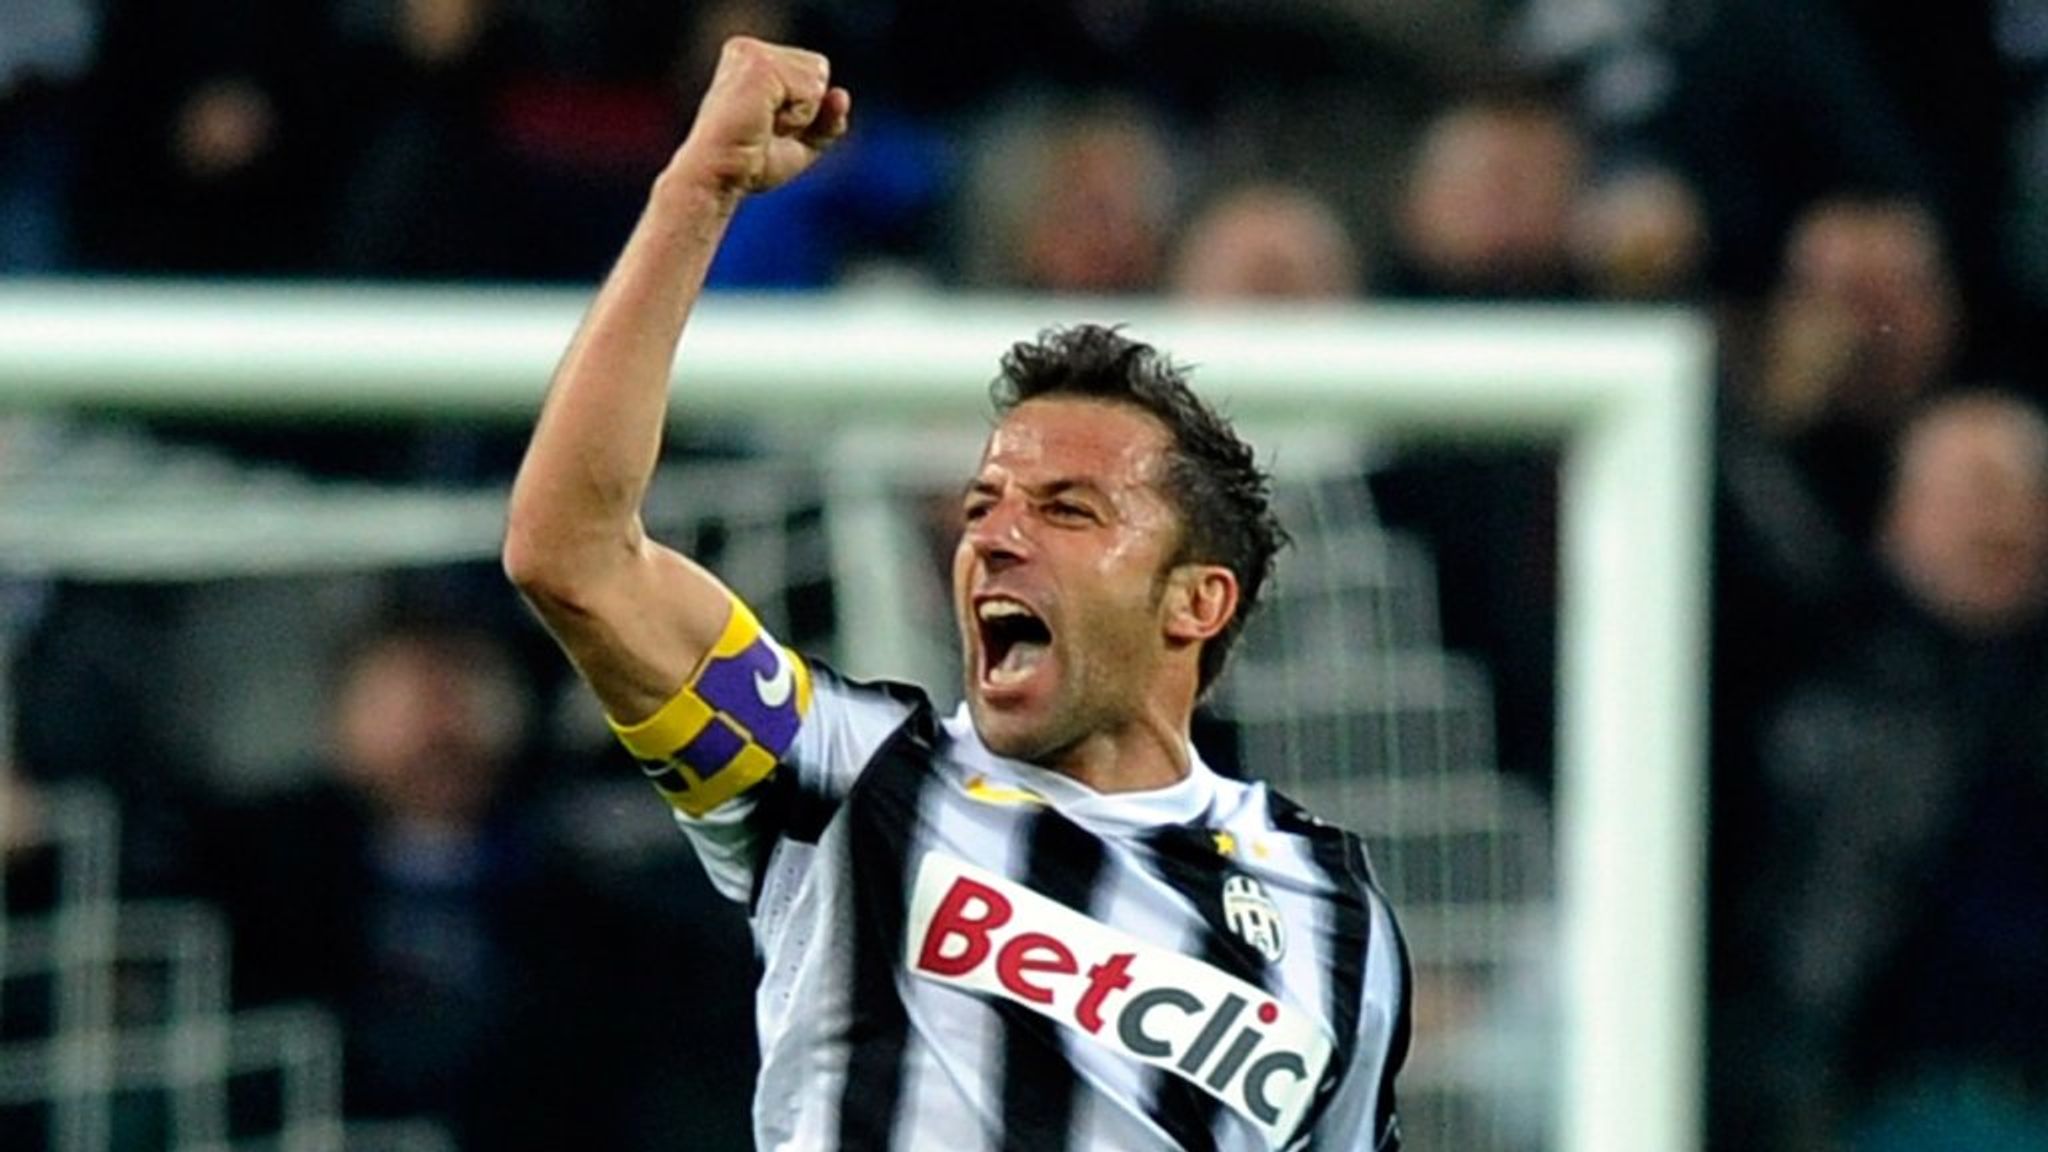 Alessandro Del Piero rejected Liverpool due to the Heysel tragedy, says former agent | Football News | Sky Sports